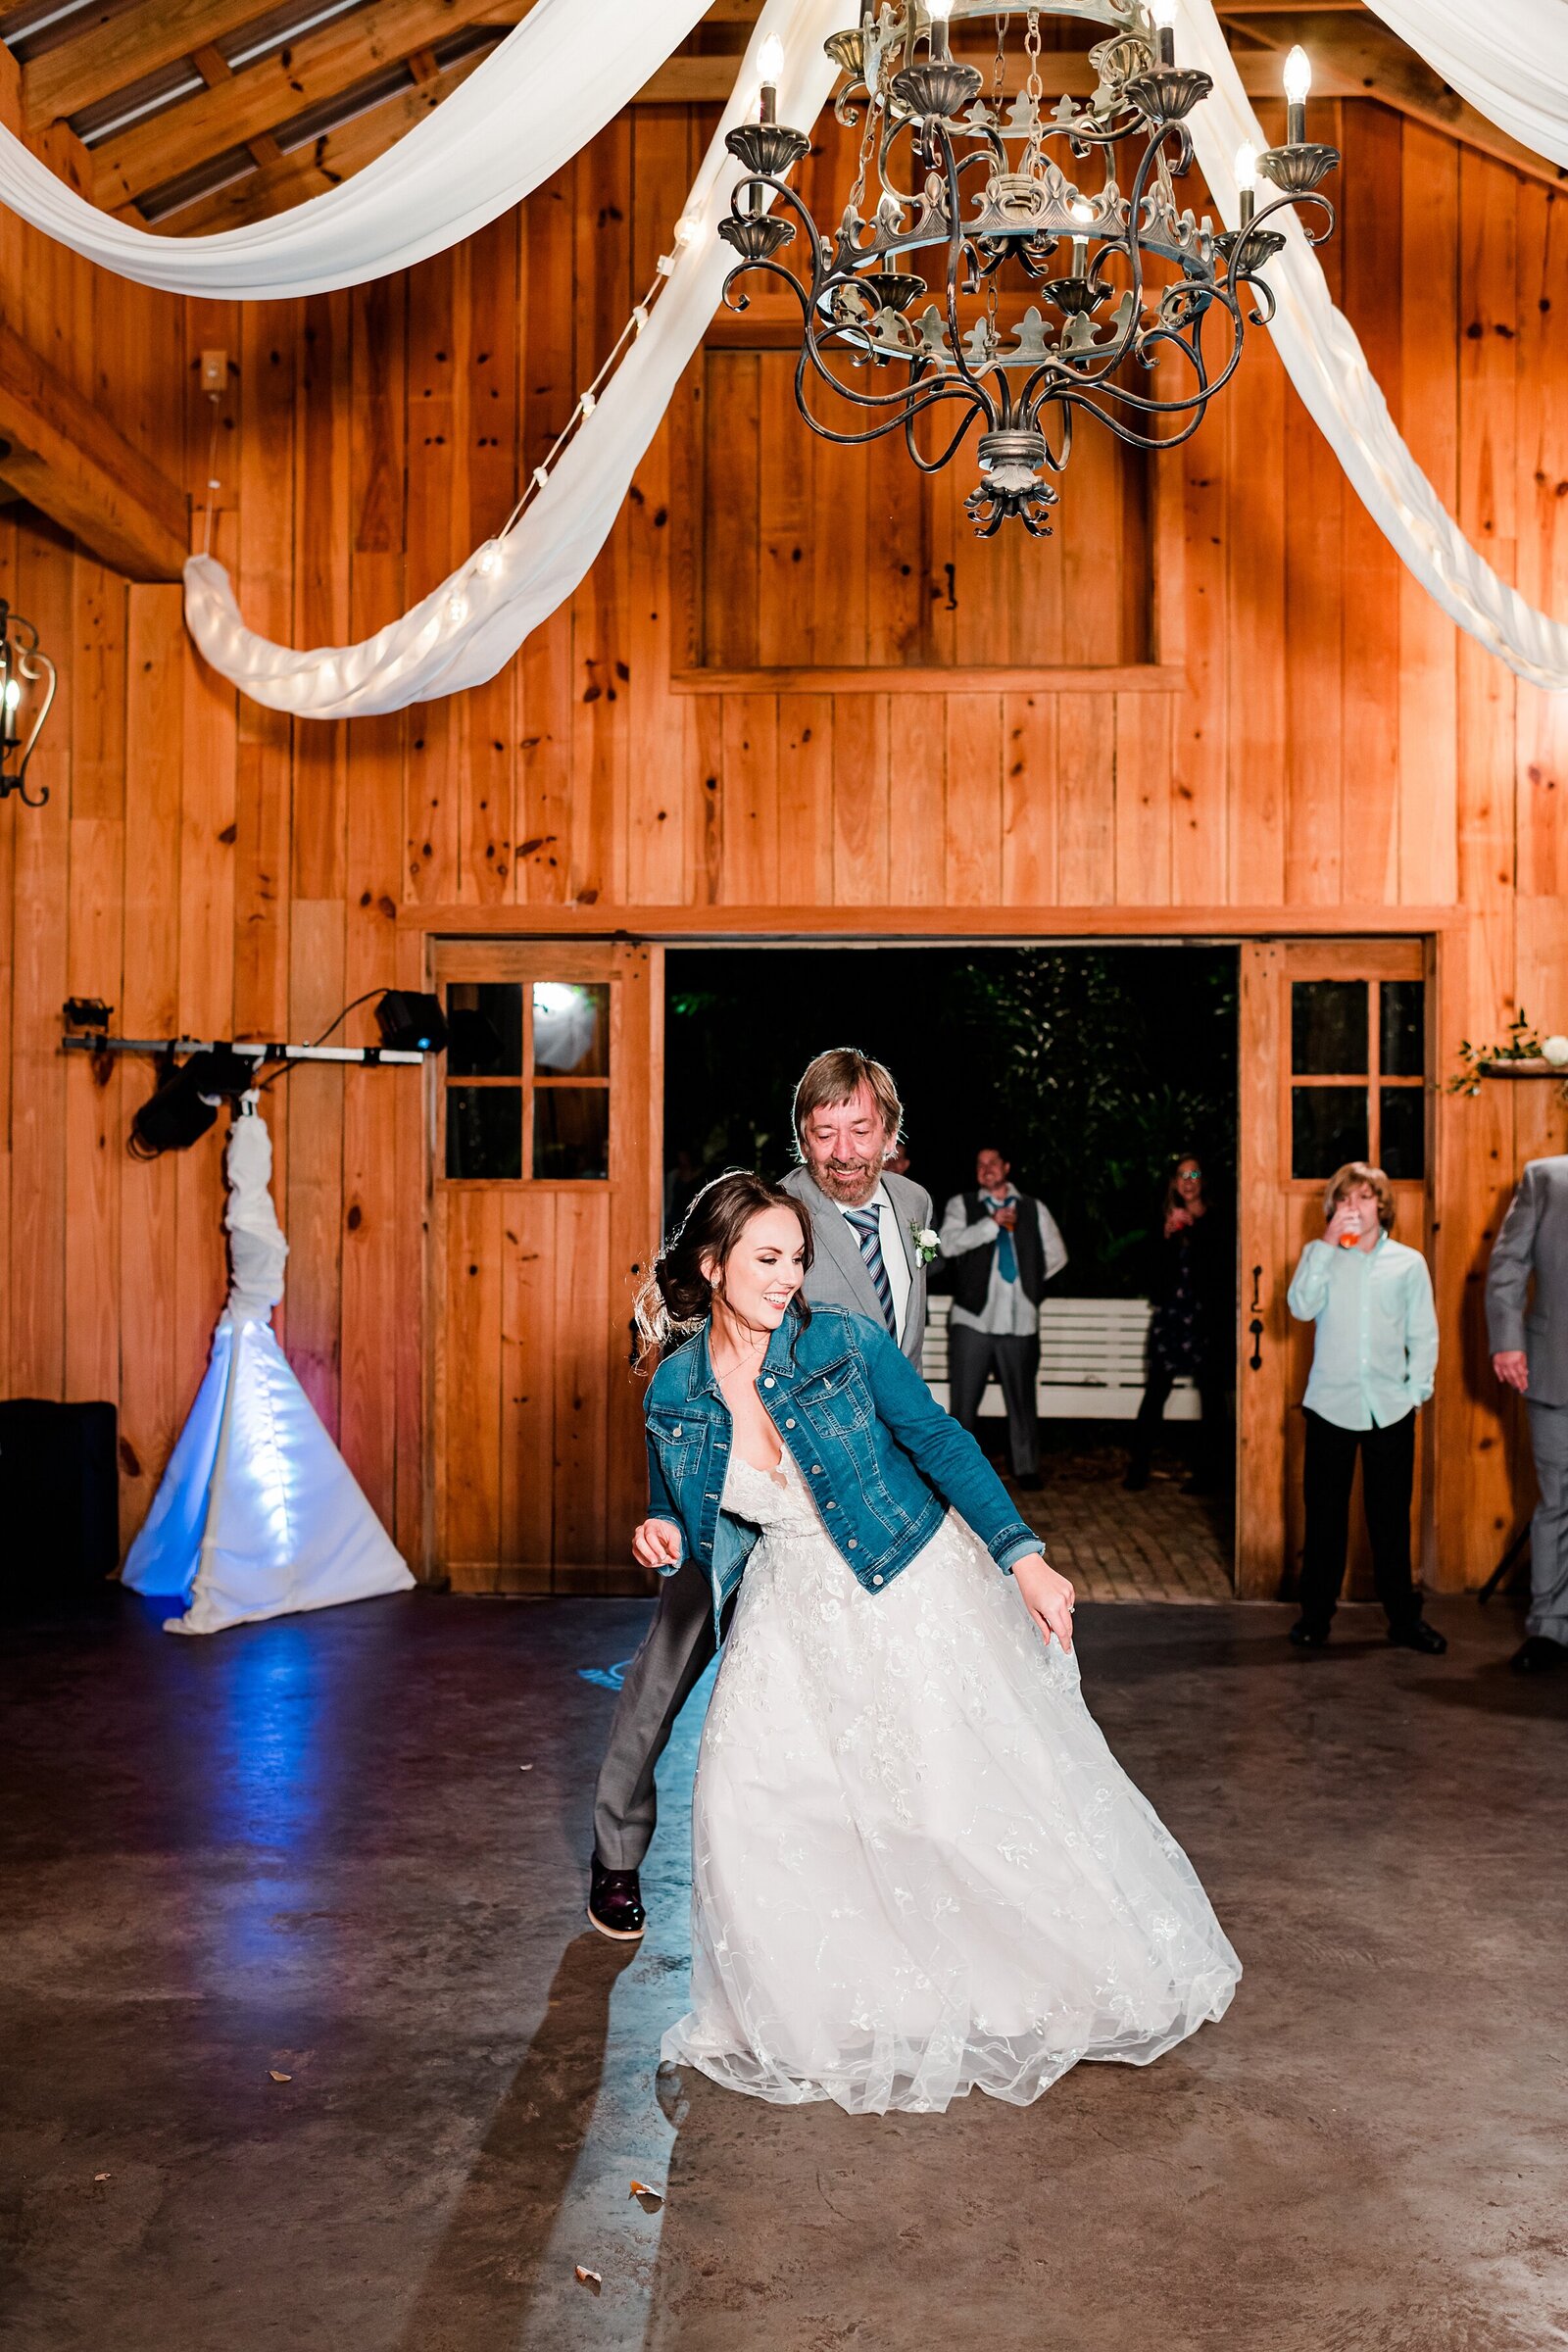 Daddy Daughter Dance | The Delamater House Wedding | Chynna Pacheco Photography-946